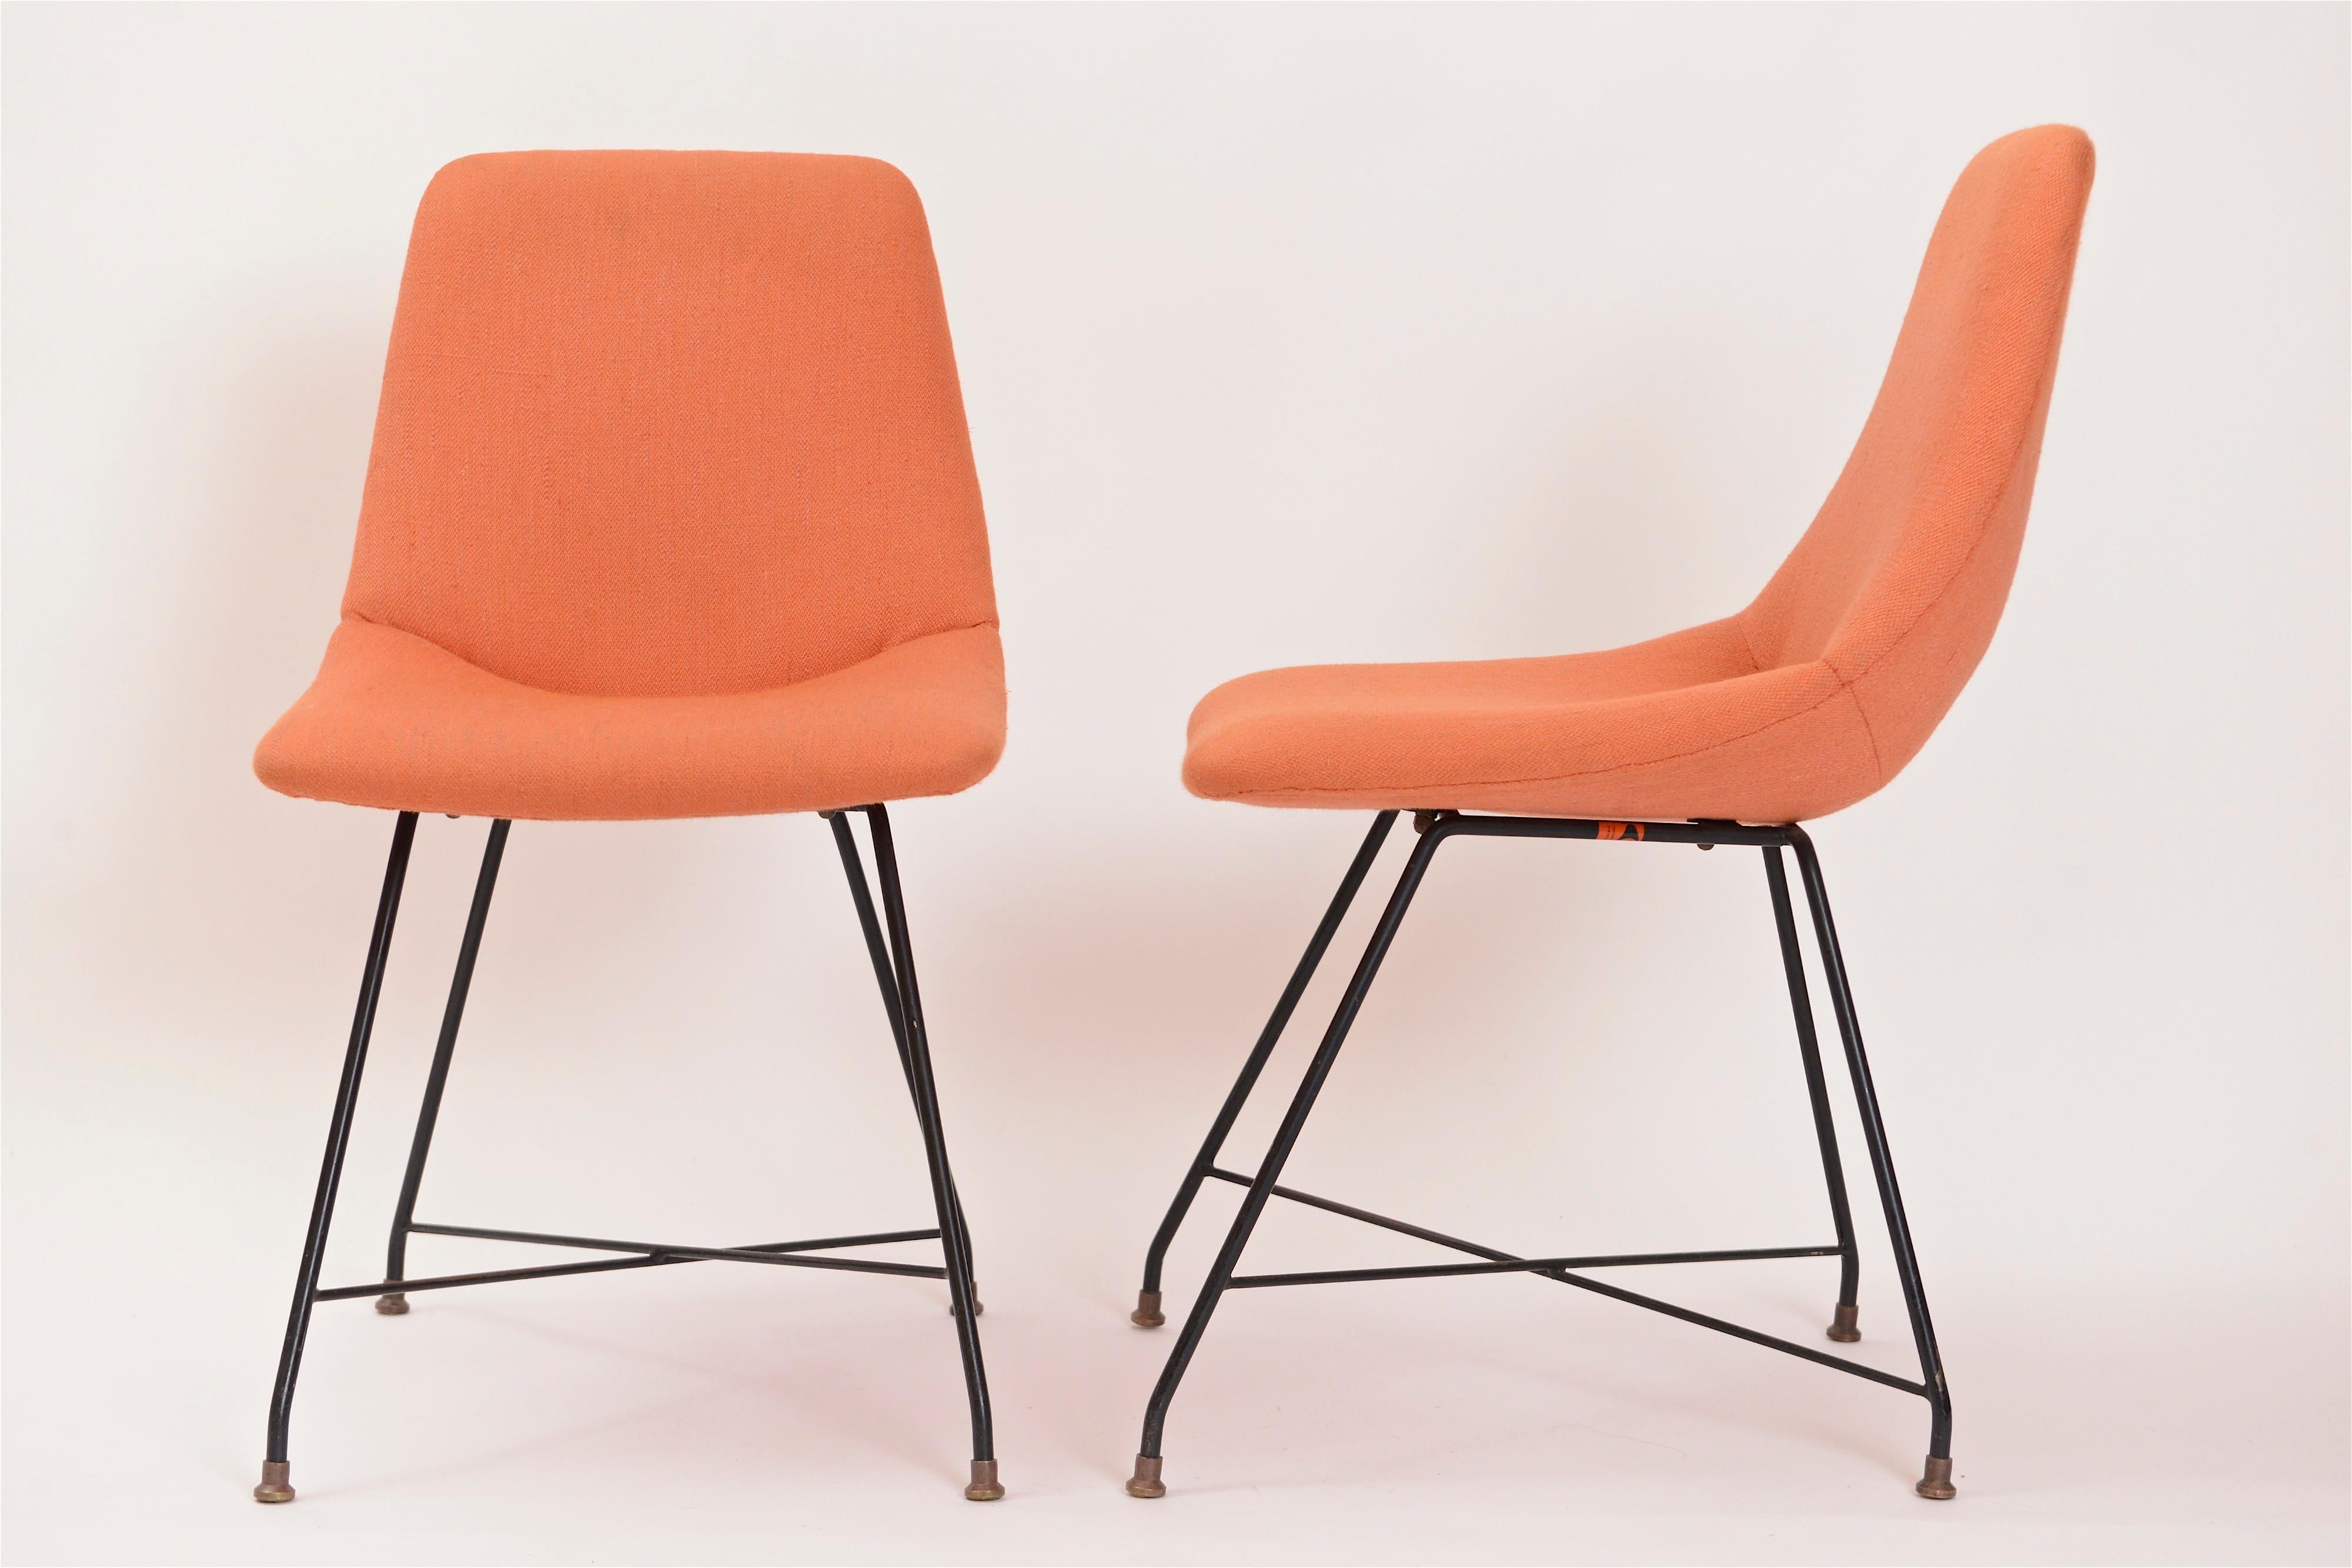 A great pair of 'Aster' chairs designed by Augusto Bozzi for Fratelli Saporiti in 1956. The chair seats, upholstered in an thick woven orange fabric, are supported by Bozzi's iconic structure of black-painted steel legs with cross stretcher and